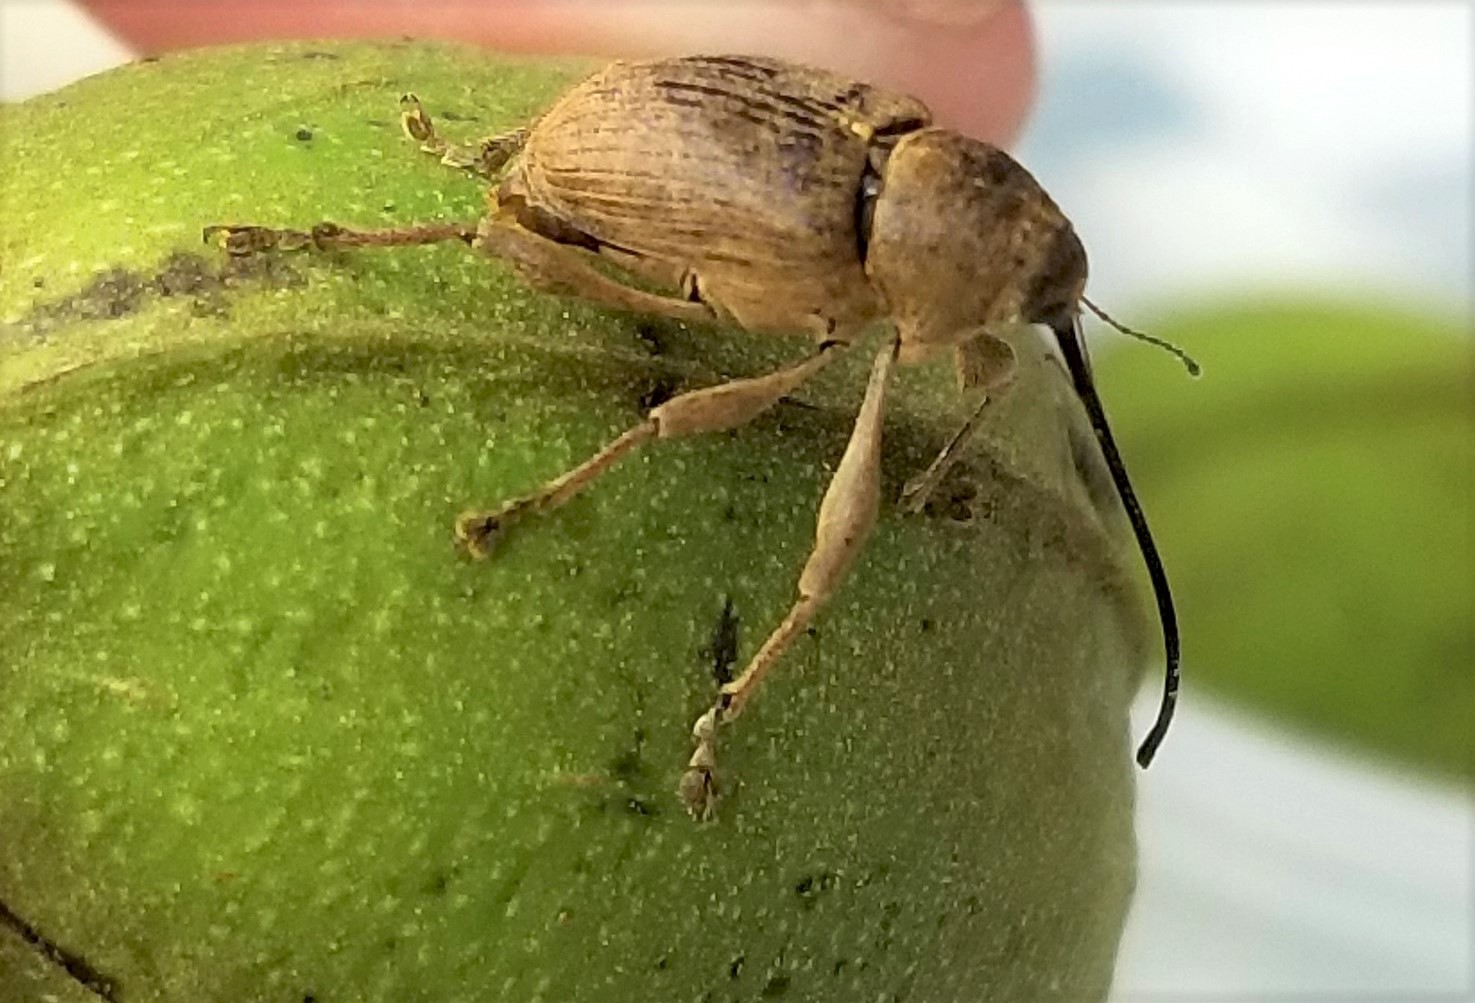 An adult pecan weevil female sits on top of a pecan shuck and prepares to pierce it with her mouthparts. Several pecan weevil quarantines in the western U.S. seek to prevent the spread of this pest.